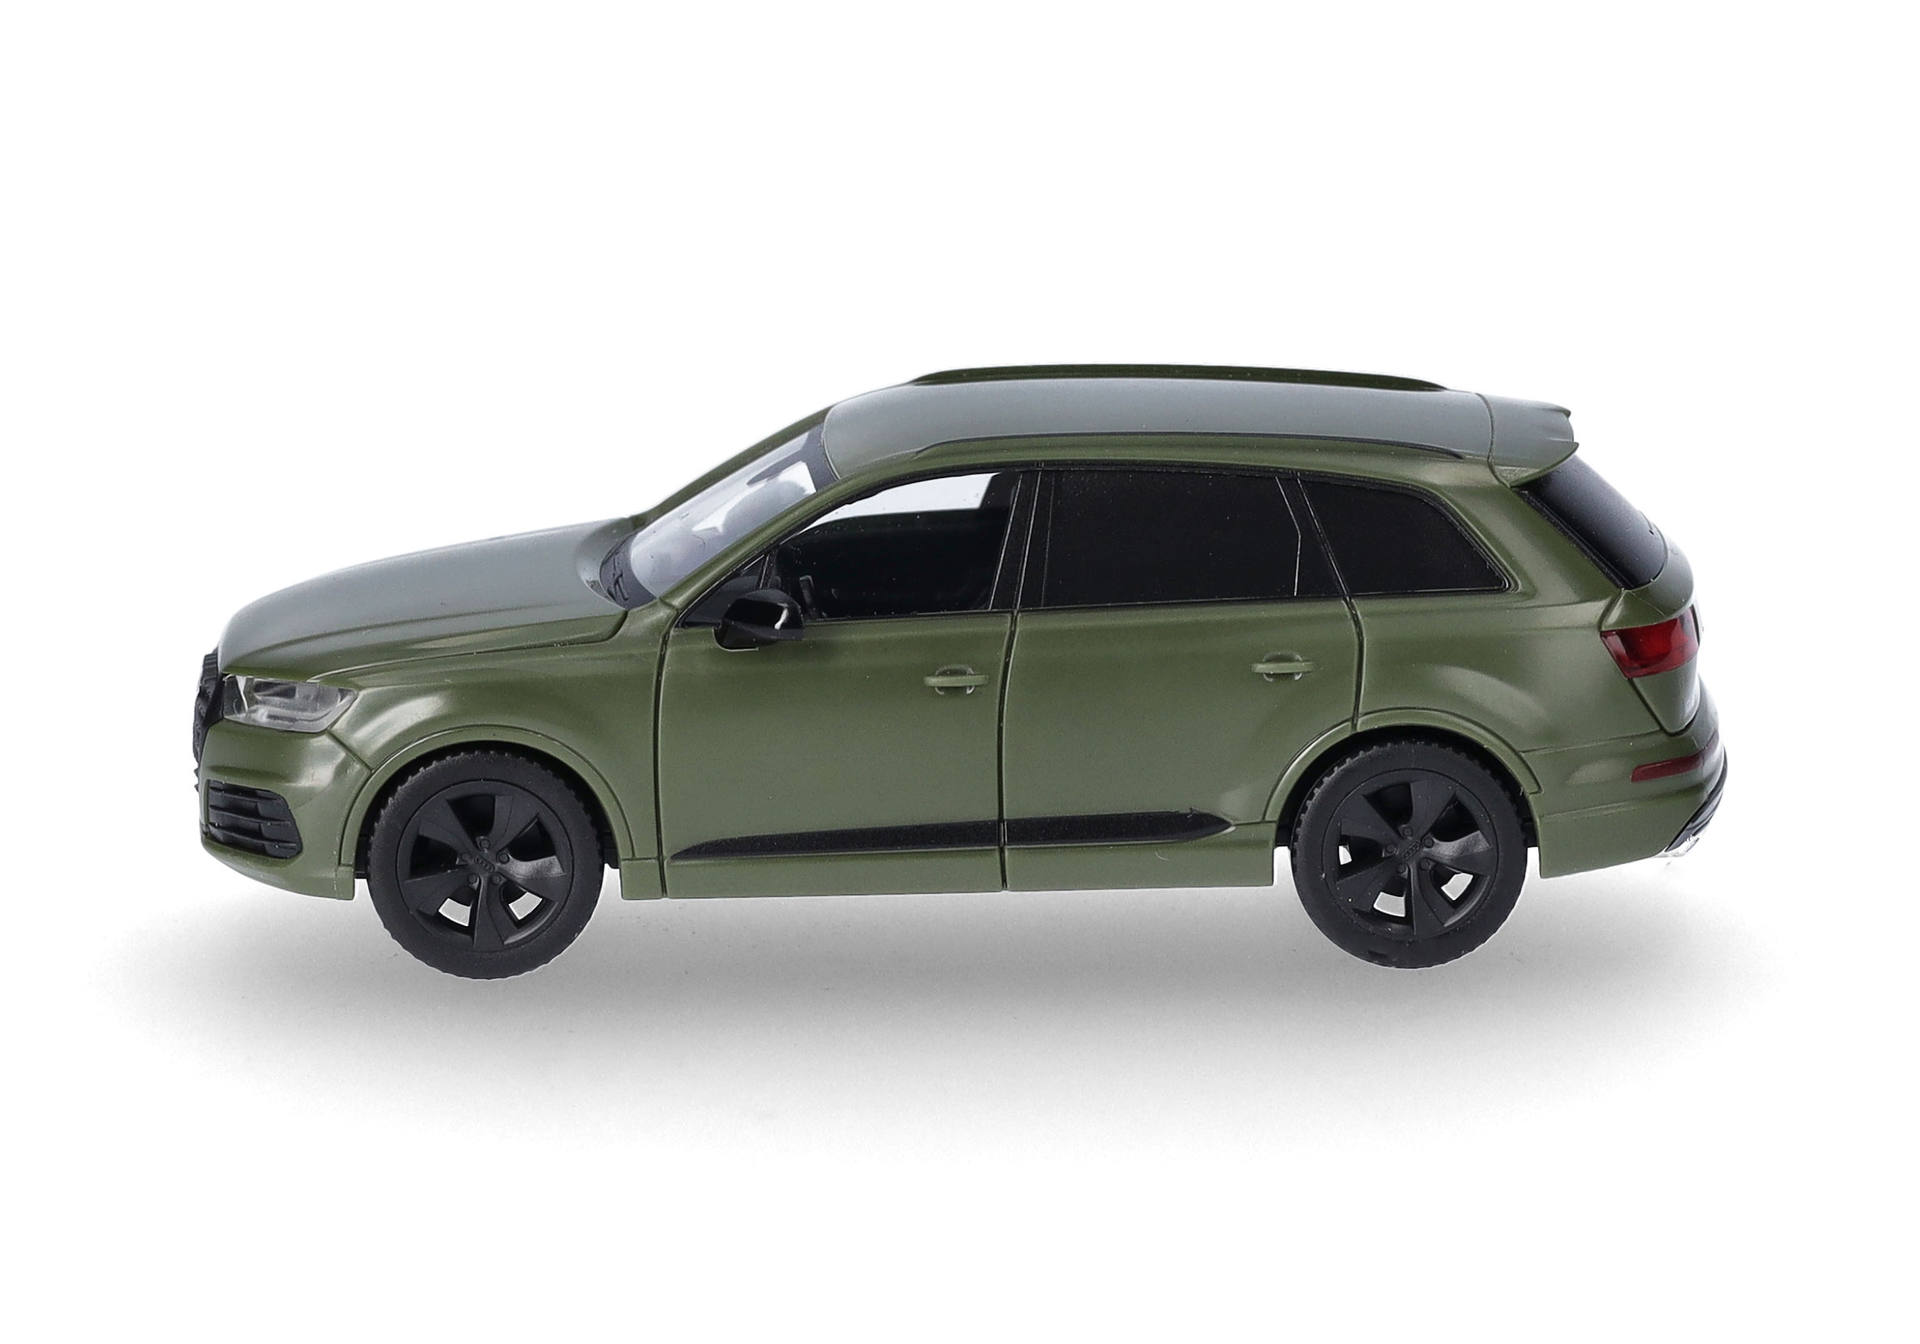 Audi Q7 with tinted windows, olive green